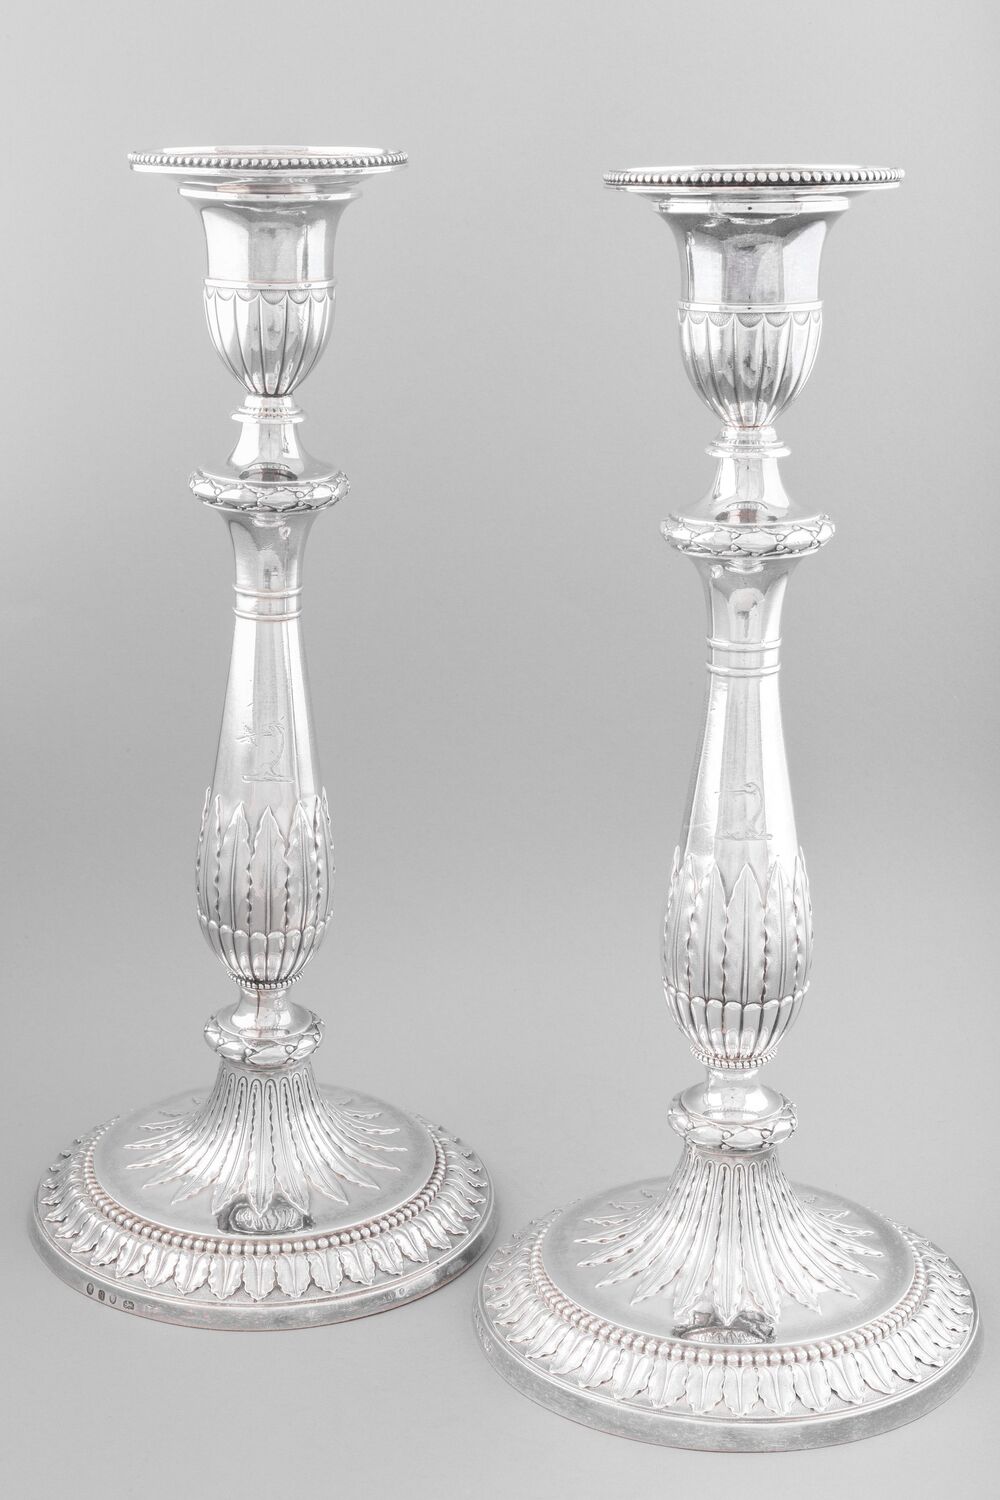 A pair of ornately carved silver candlesticks are displayed against a plain grey background.